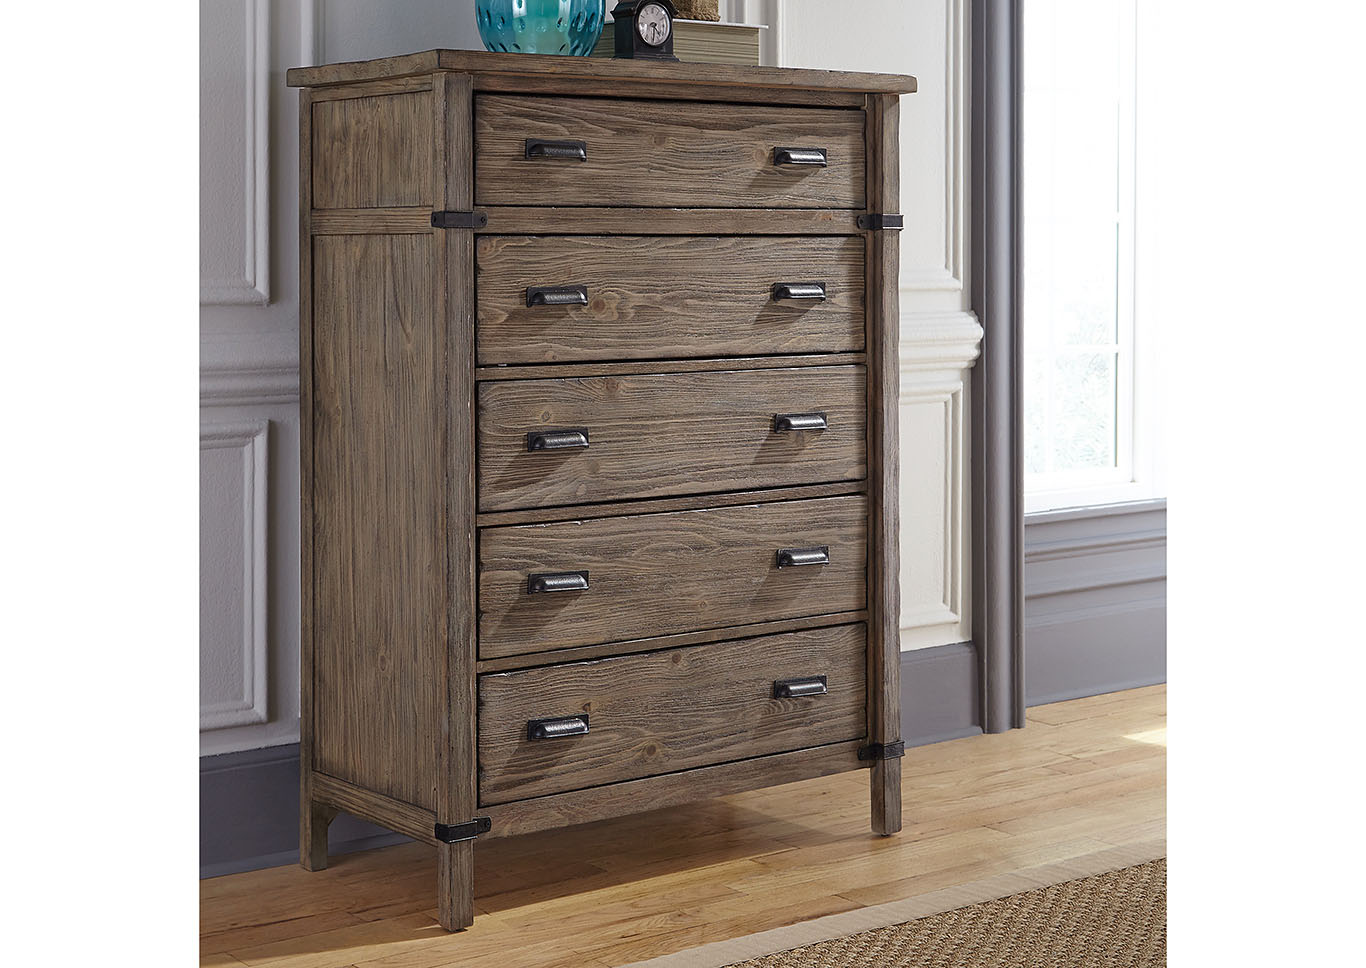 Foundry Driftwood Drawer Chest,Kincaid